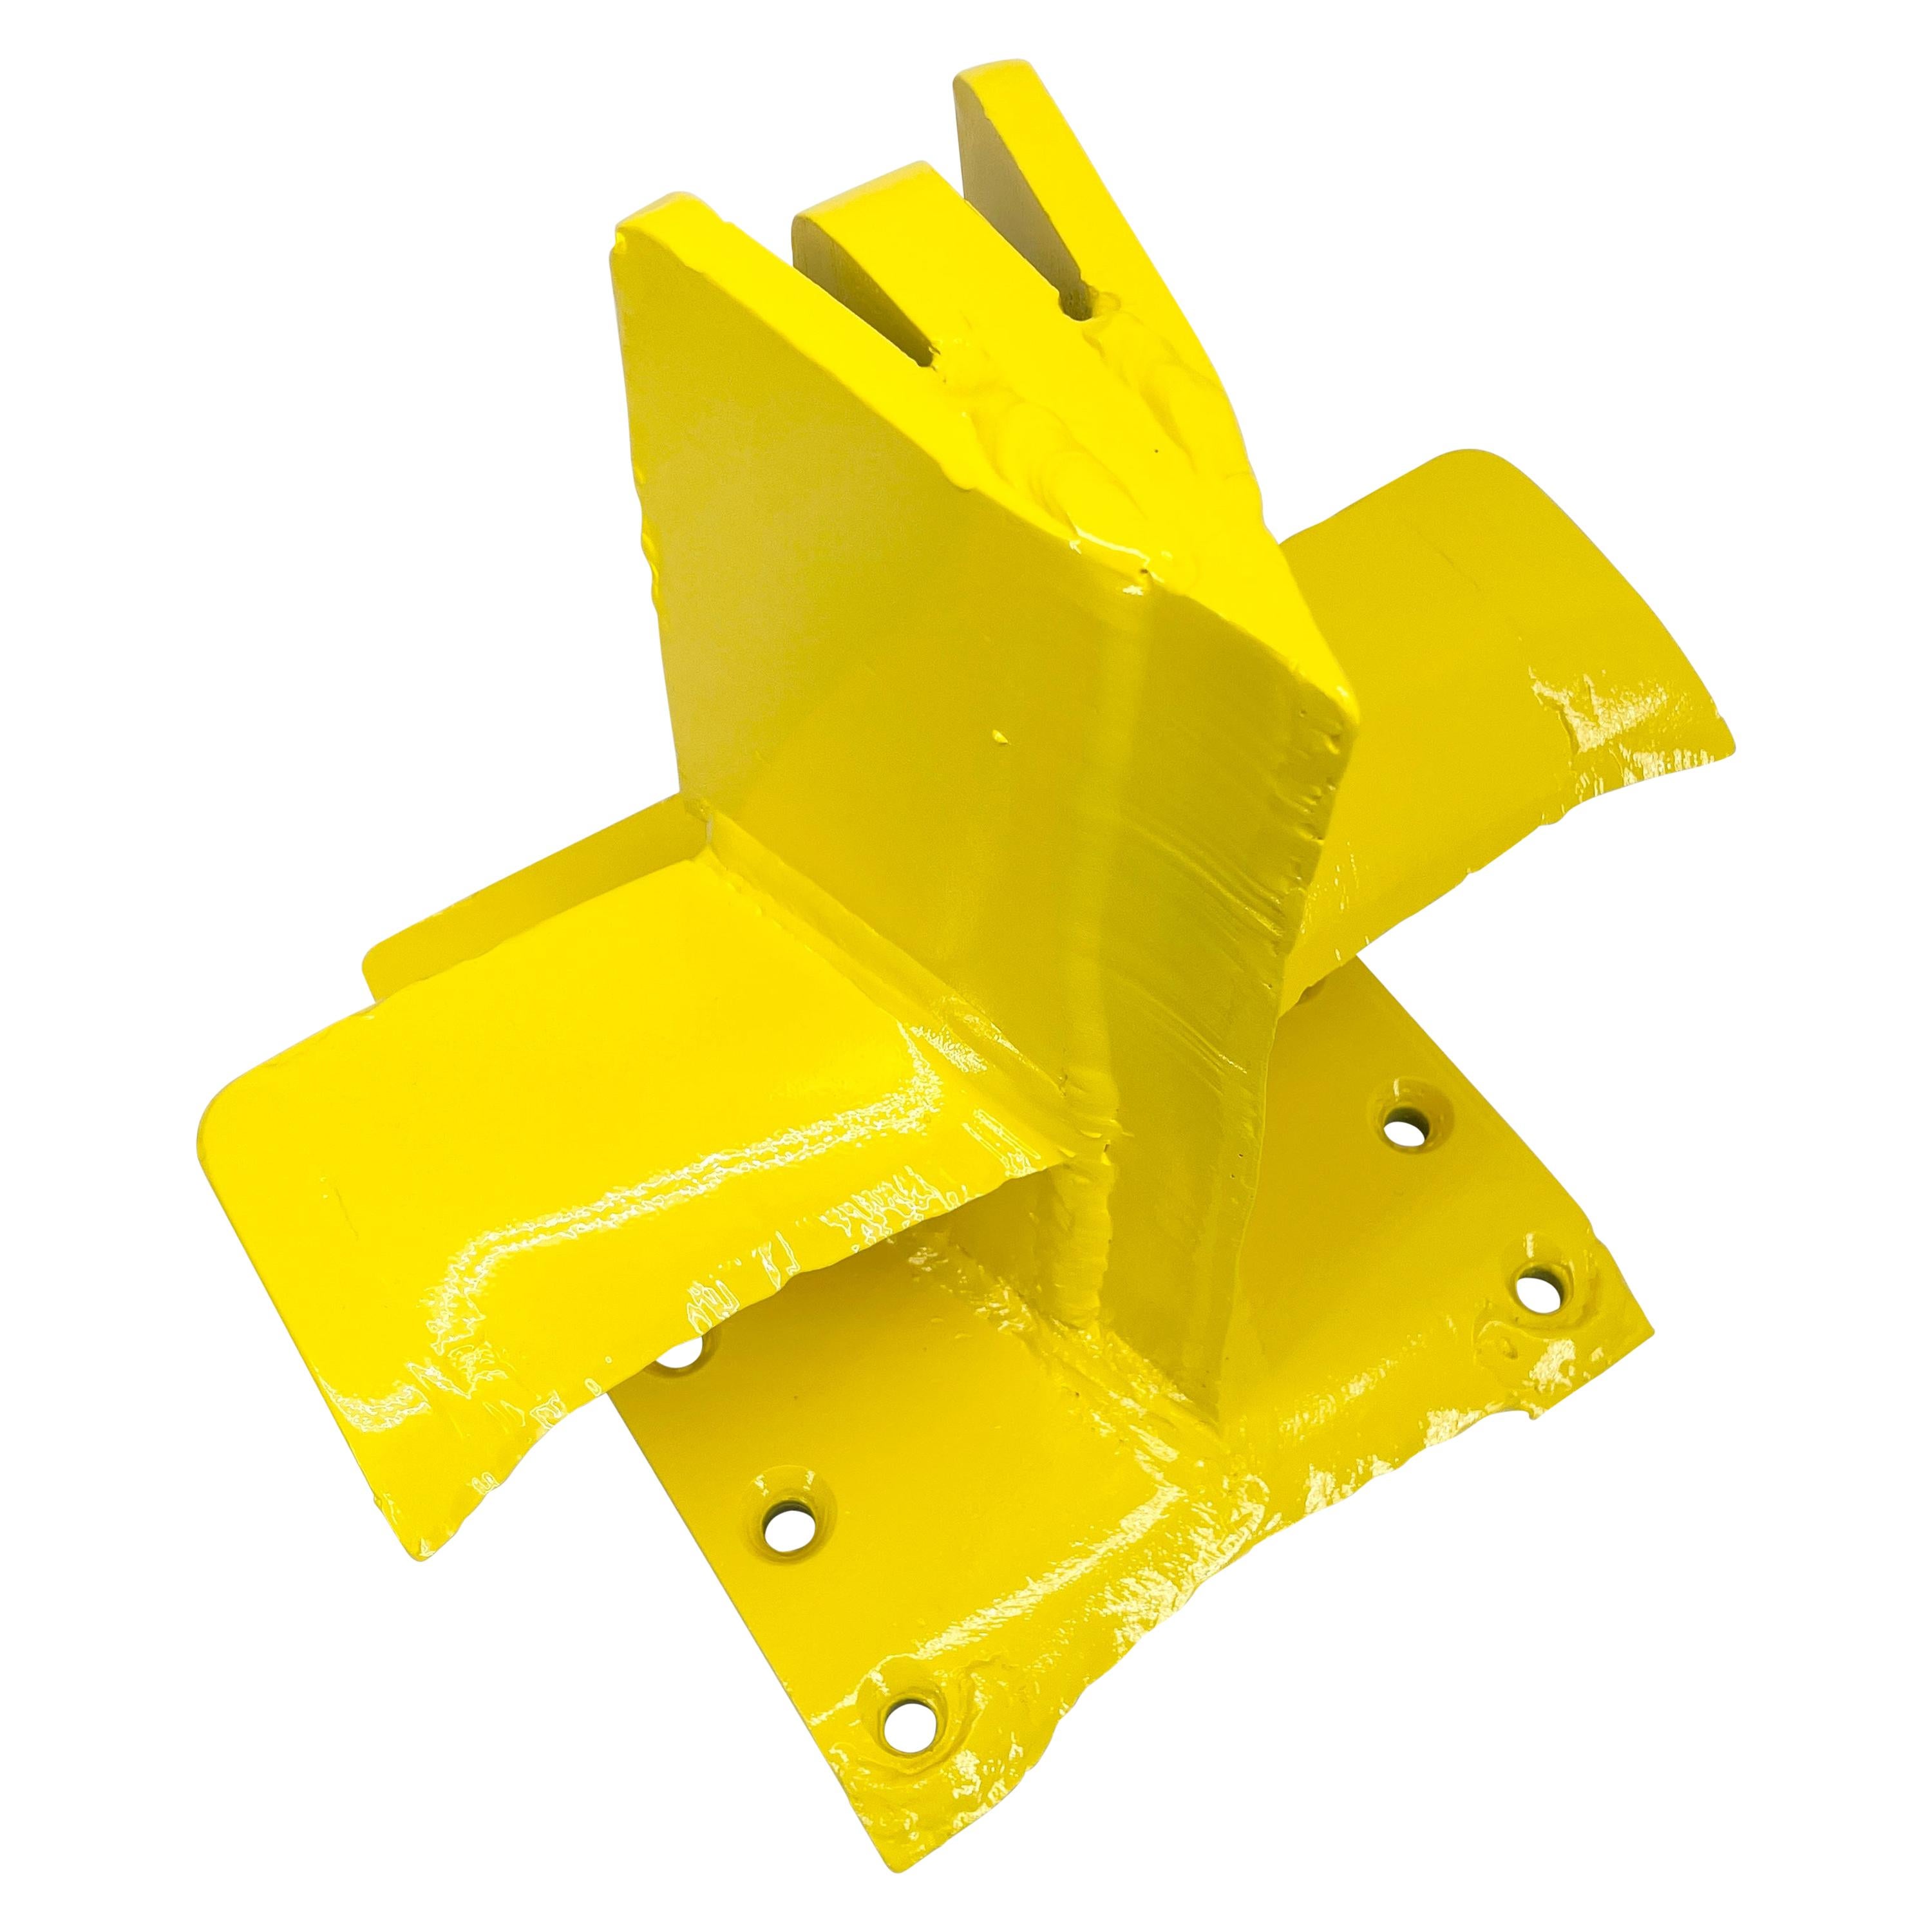 Bright Sunshine Yellow Abstract Eagle Head Sculpture From a 3 Way Wood Splitter For Sale